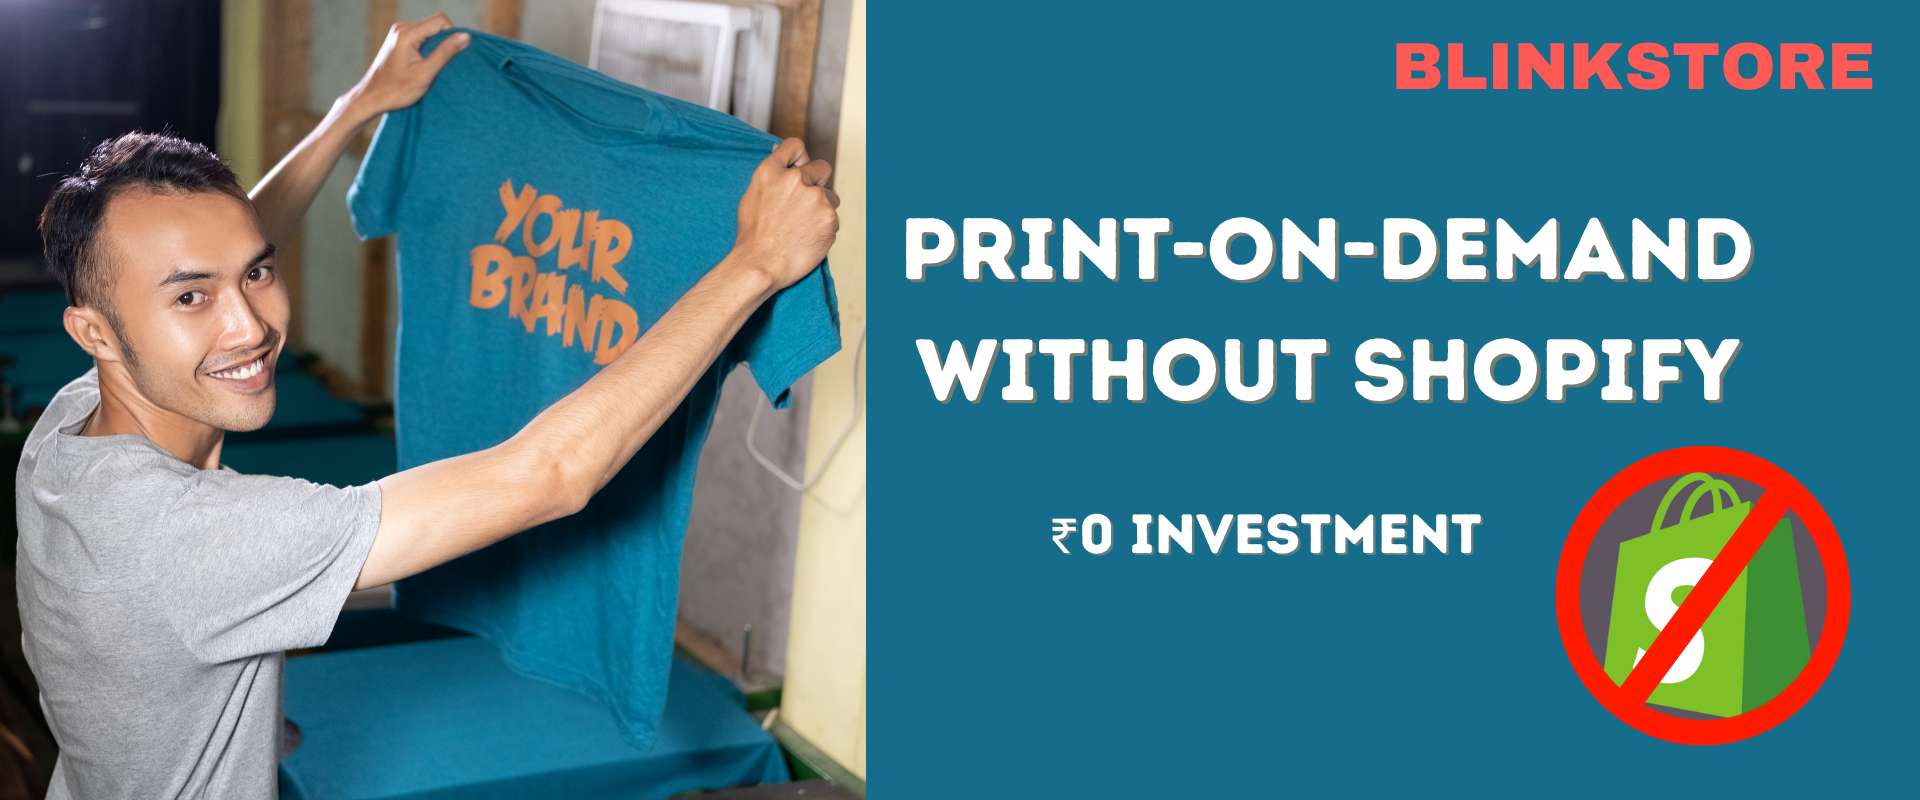 Print on Demand Without Shopify